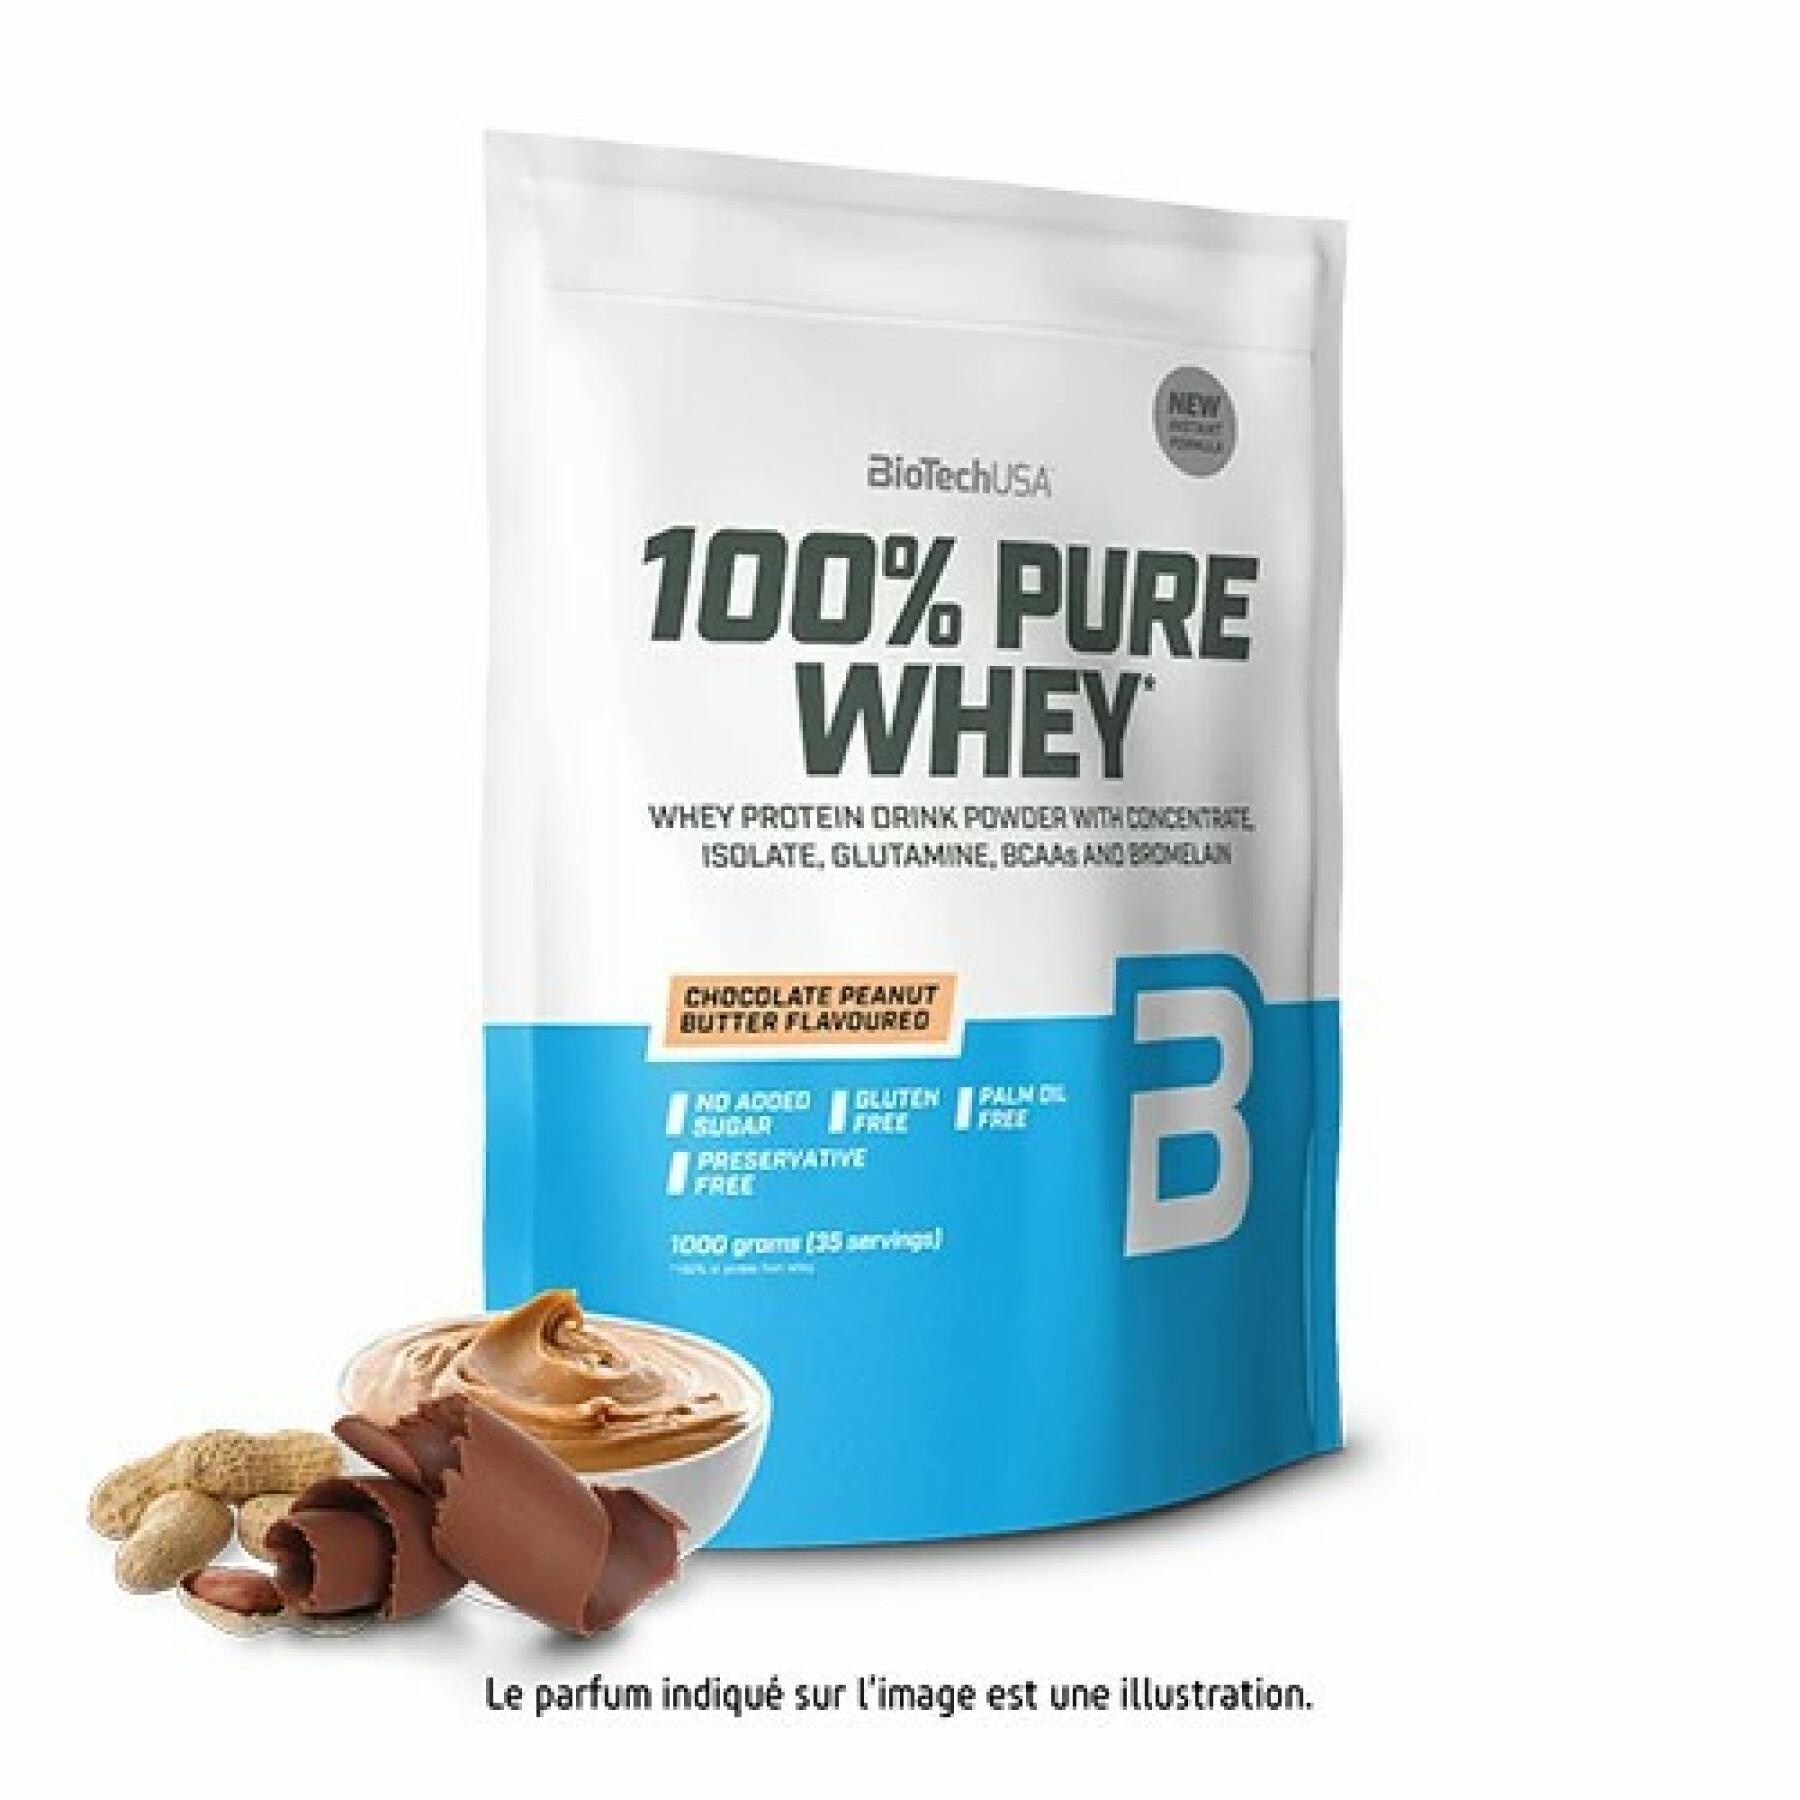 Lot of 10 bags of 100% pure whey protein Biotech USA - Chocolat-beurre de noise - 1kg